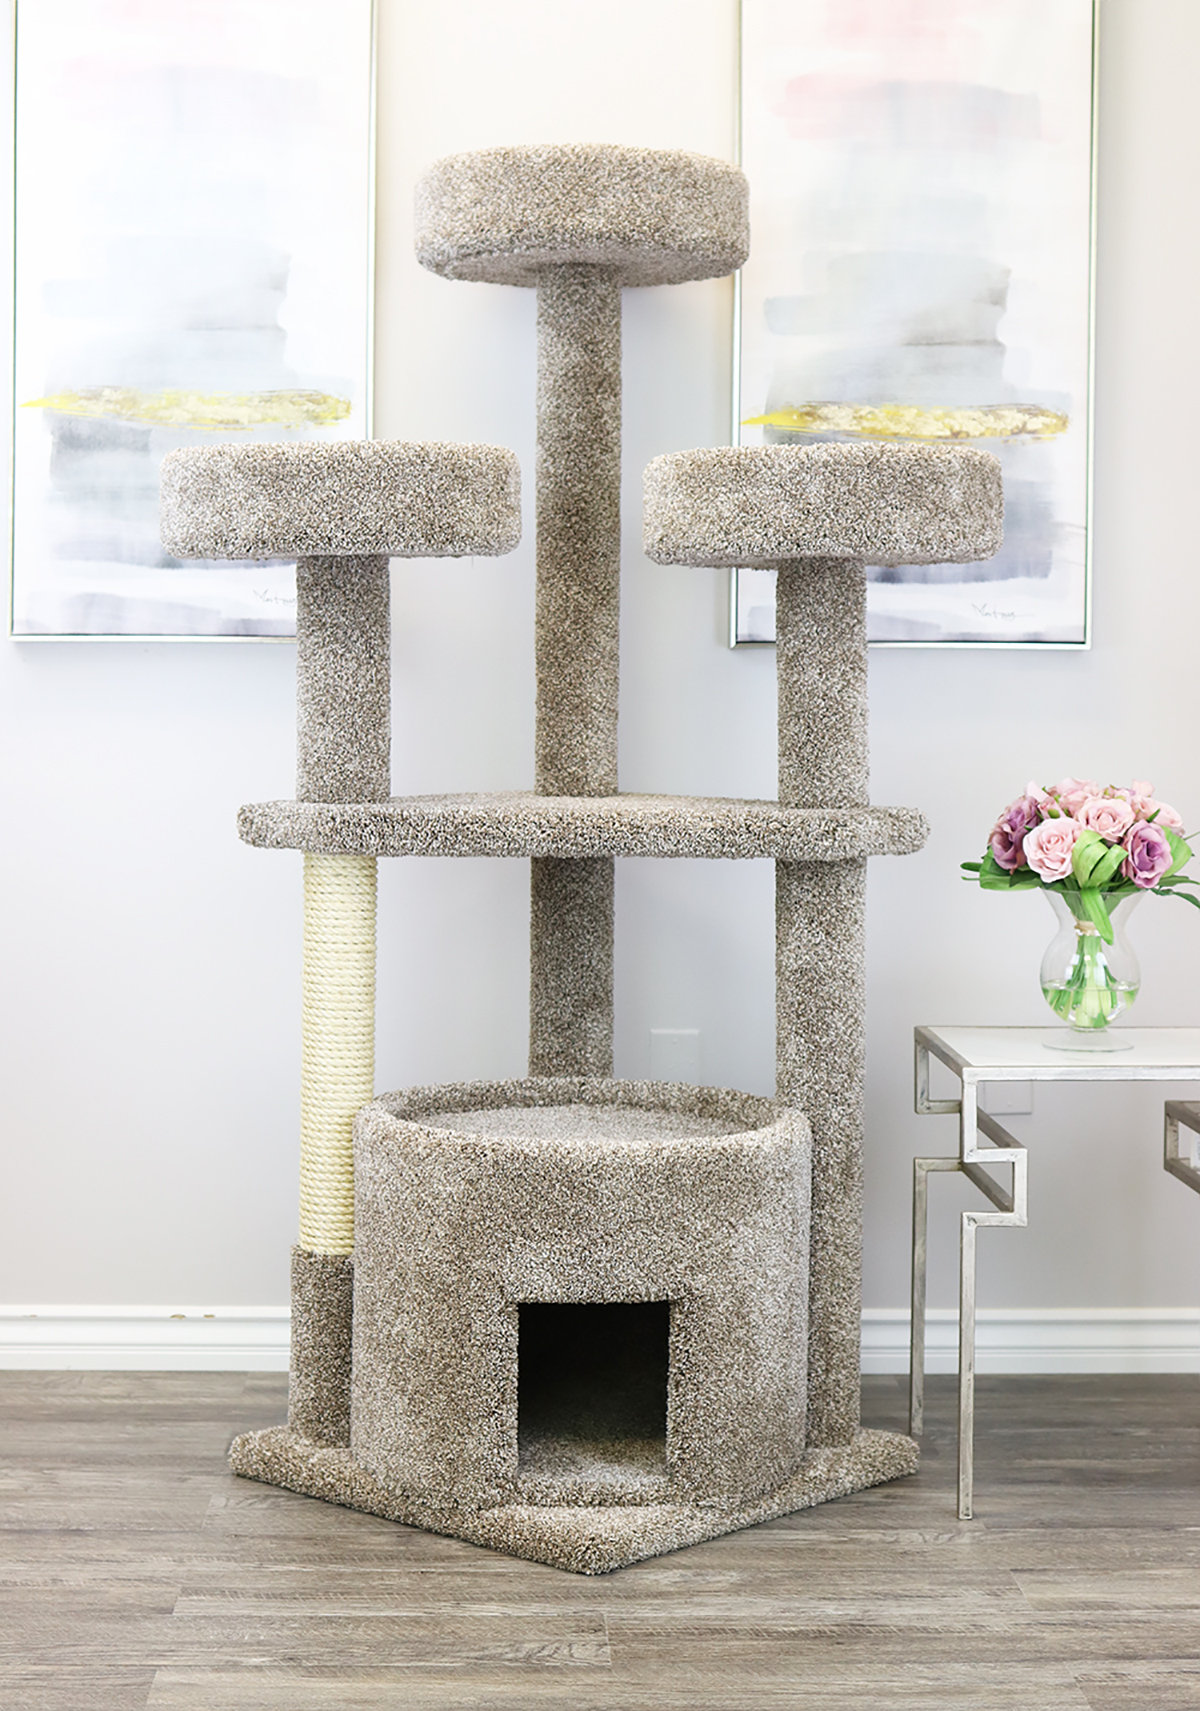 MADE IN UK STURDY BIG STRONG Giant Maine Coon & Large Cat Scratching Post